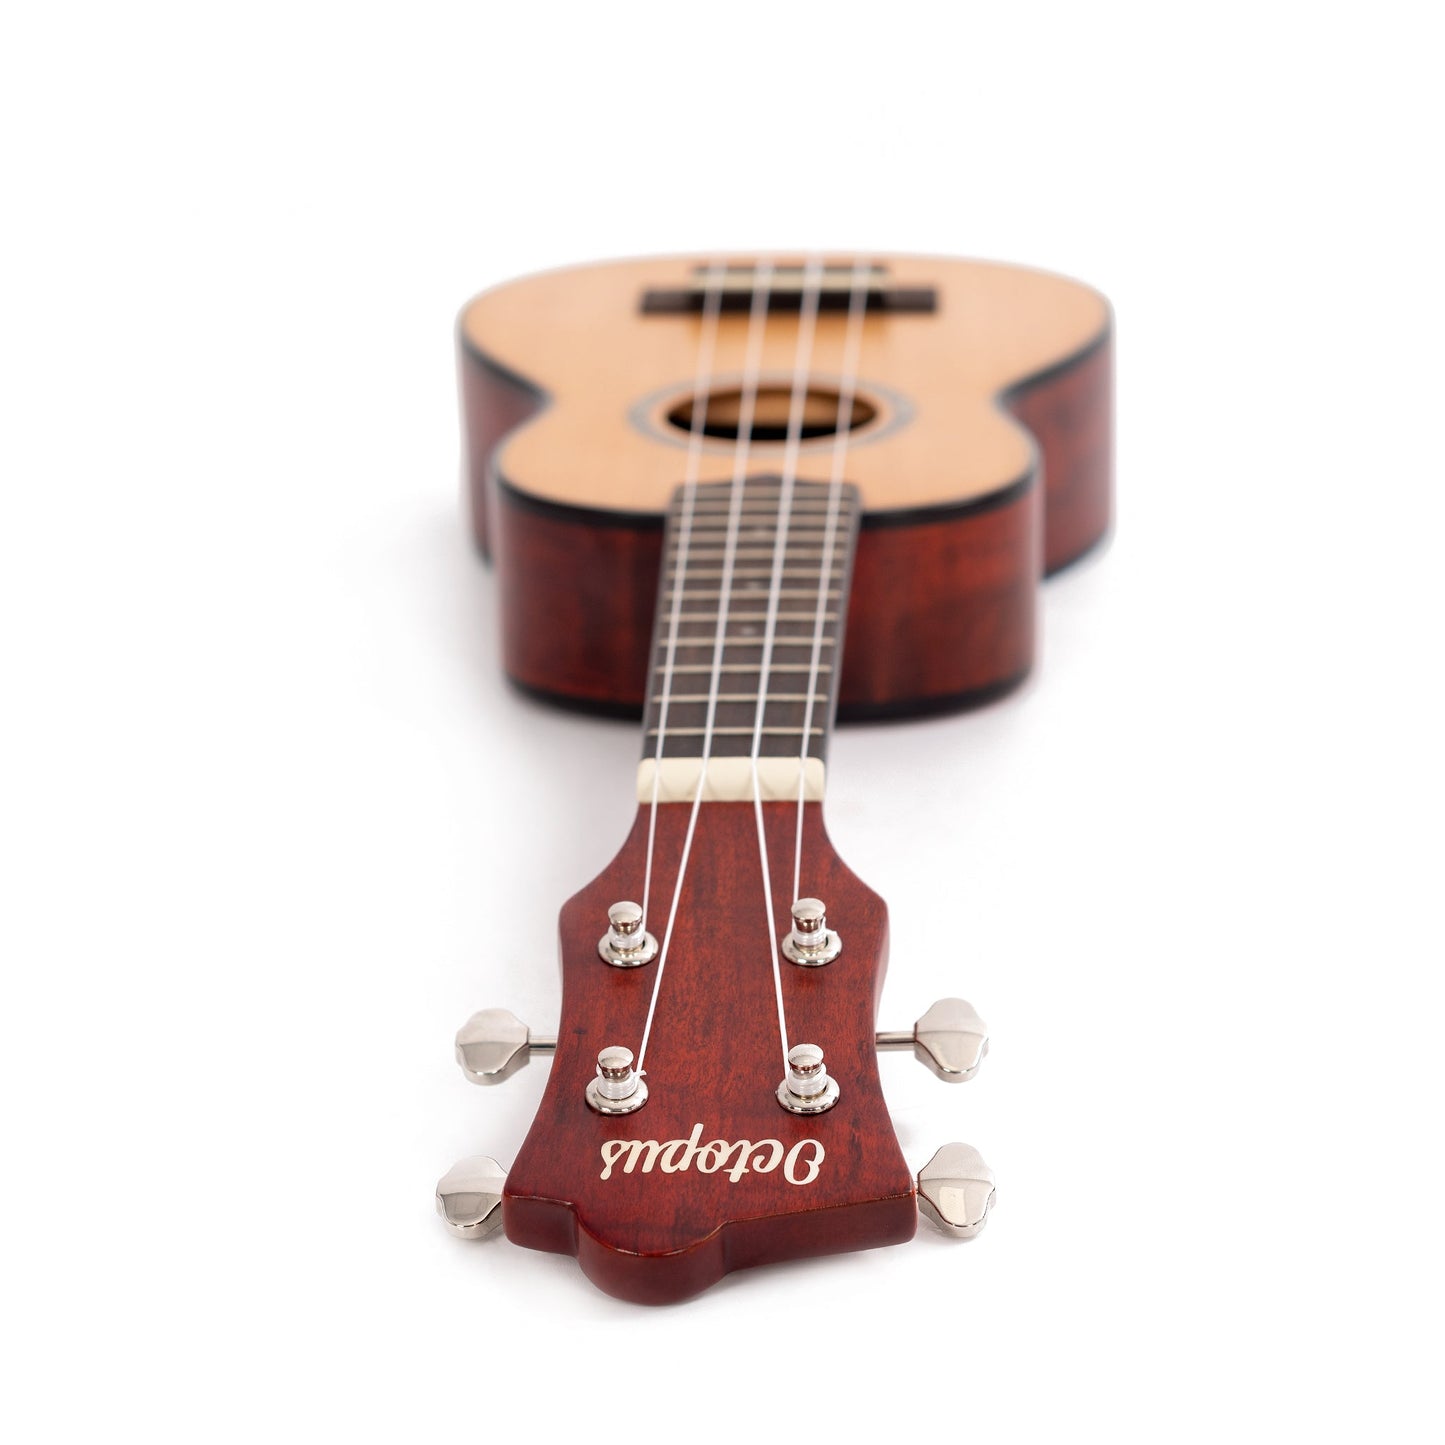 Octopus UK440S Soprano ukulele – Flamed maple with solid cedar top